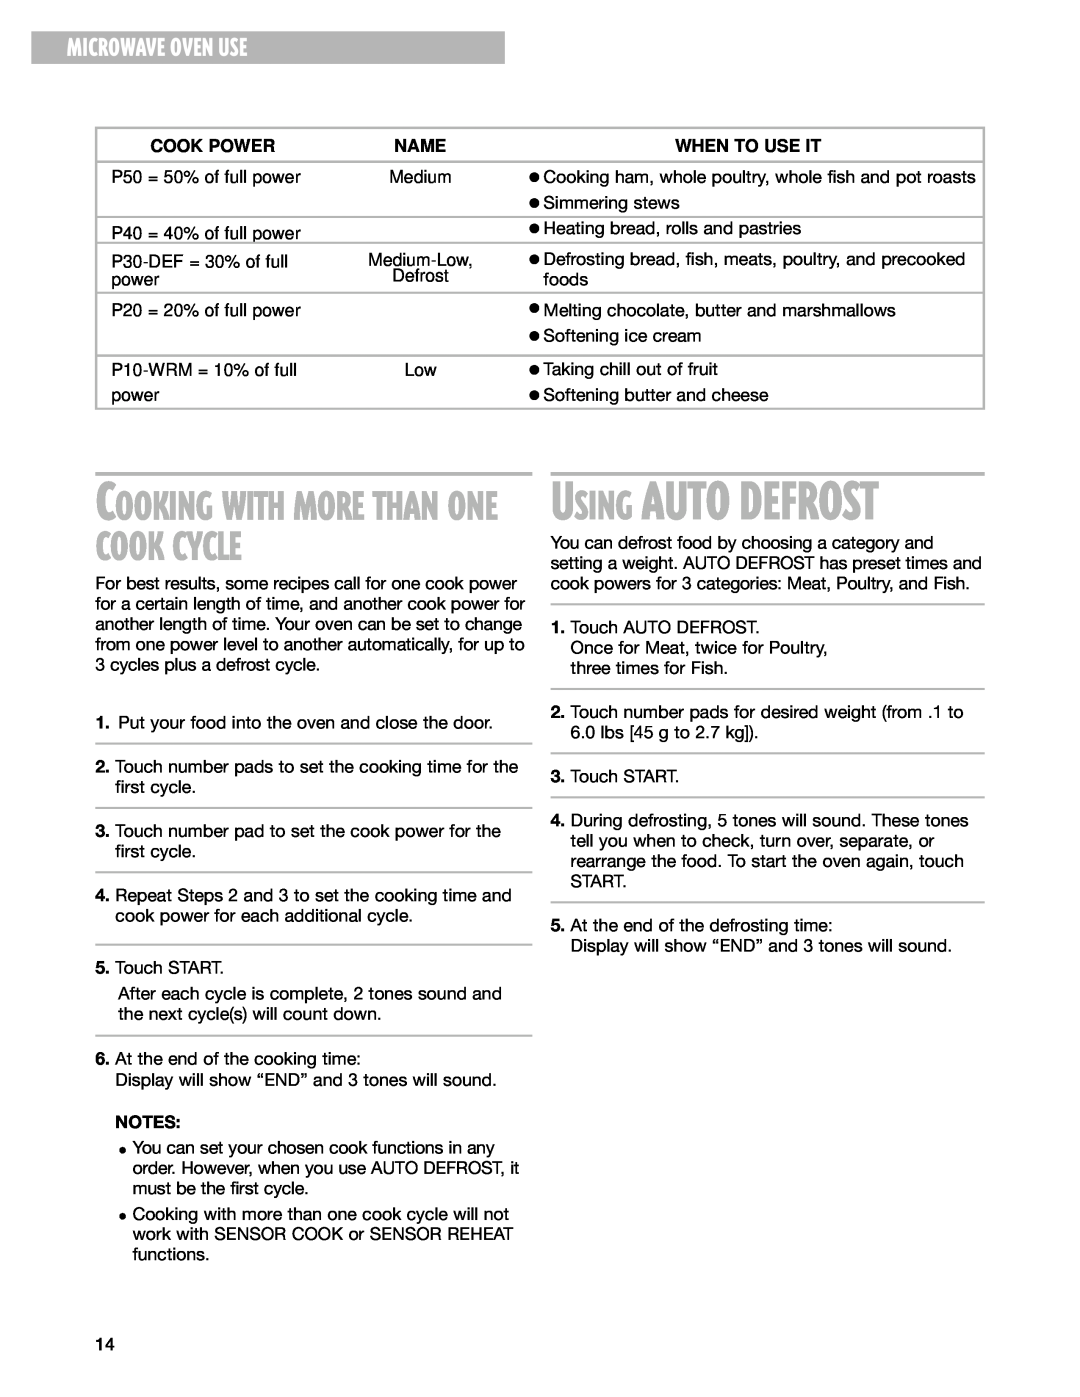 Whirlpool MT4145SK installation instructions Using Auto Defrost, Microwave Oven Use, Cooking With More Than One Cook Cycle 